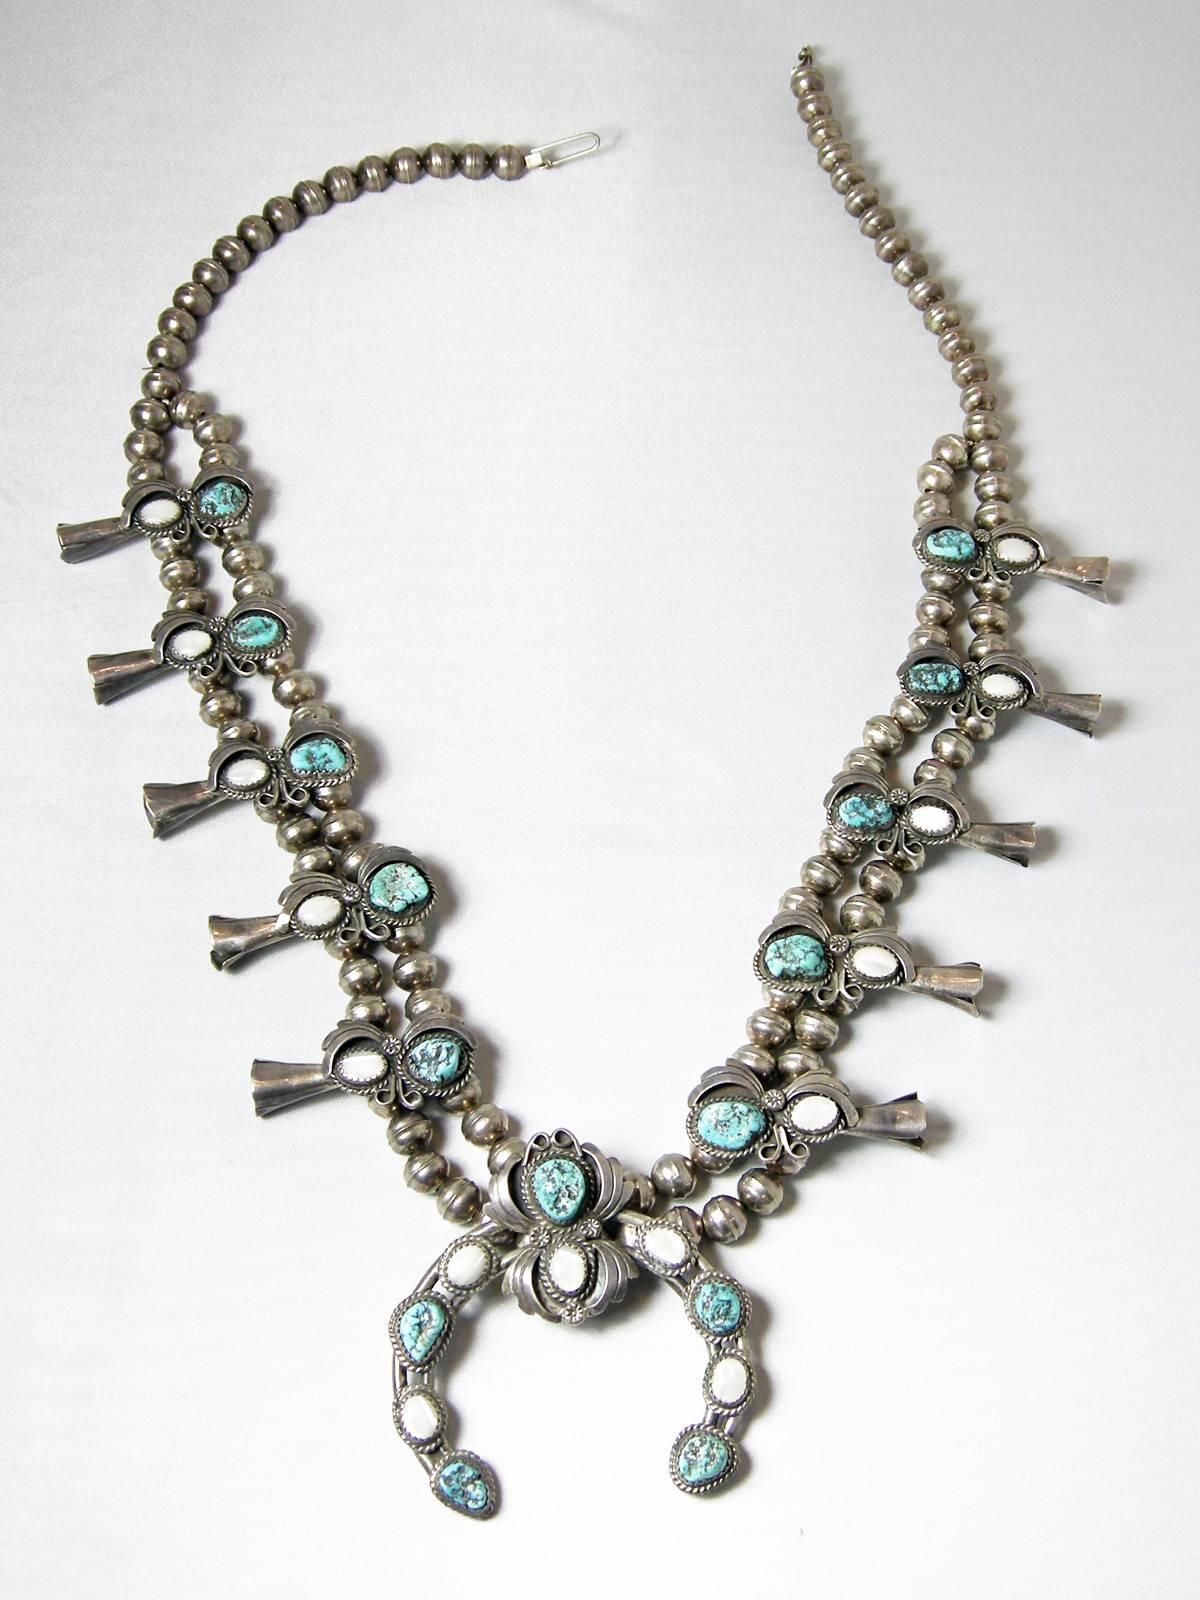 This magnificent necklace is sterling silver with silver beads leading down to a double row of silver beads.  You have 5 segments on each side with turquoise and mother of pearl with horn like ends.  All the stones are bezel with an ornate silver